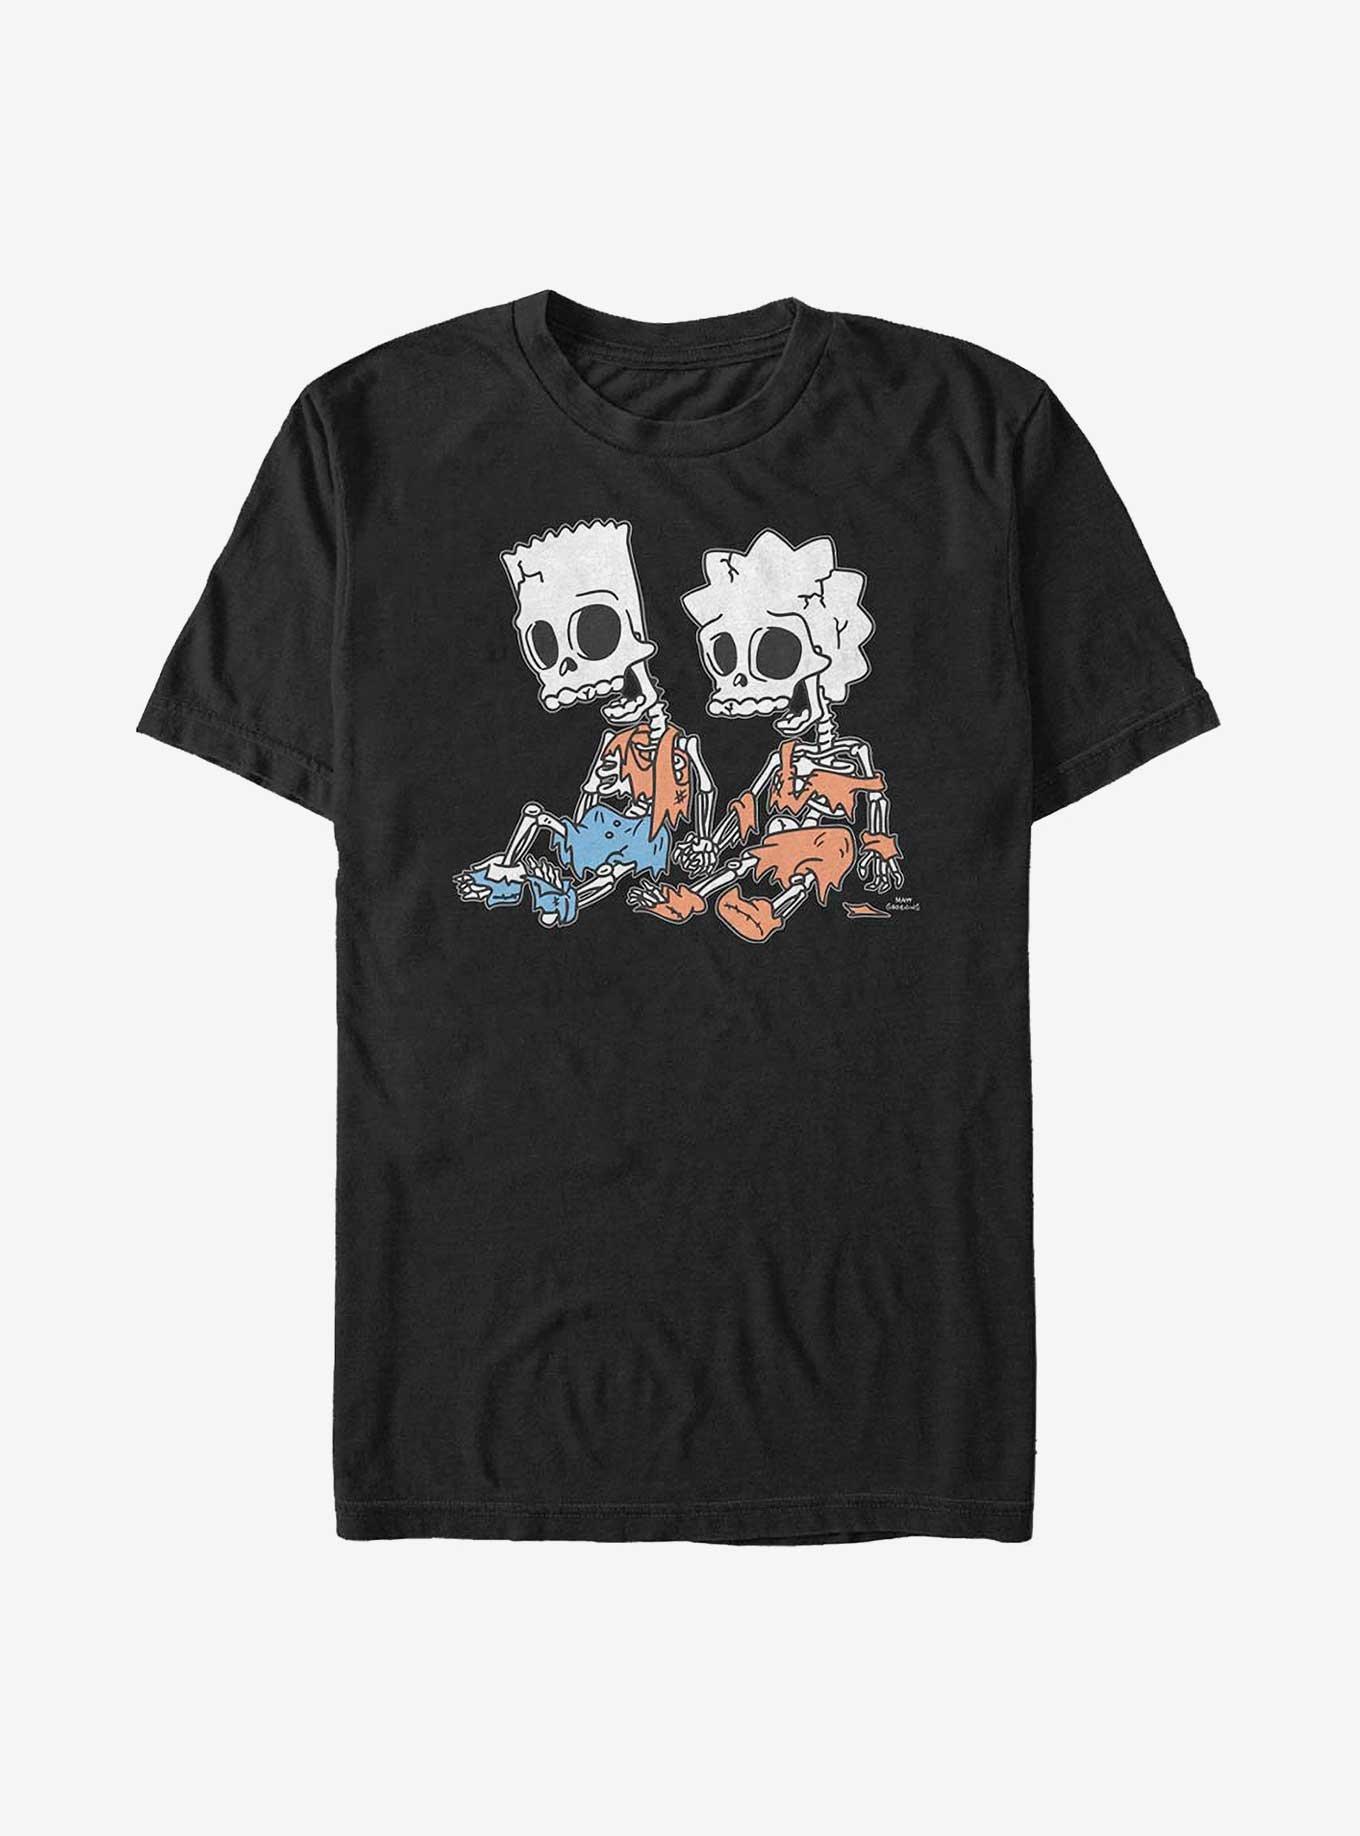 Extra Soft The Simpsons Skeleton Bart and Lisa T-Shirt, BLACK, hi-res